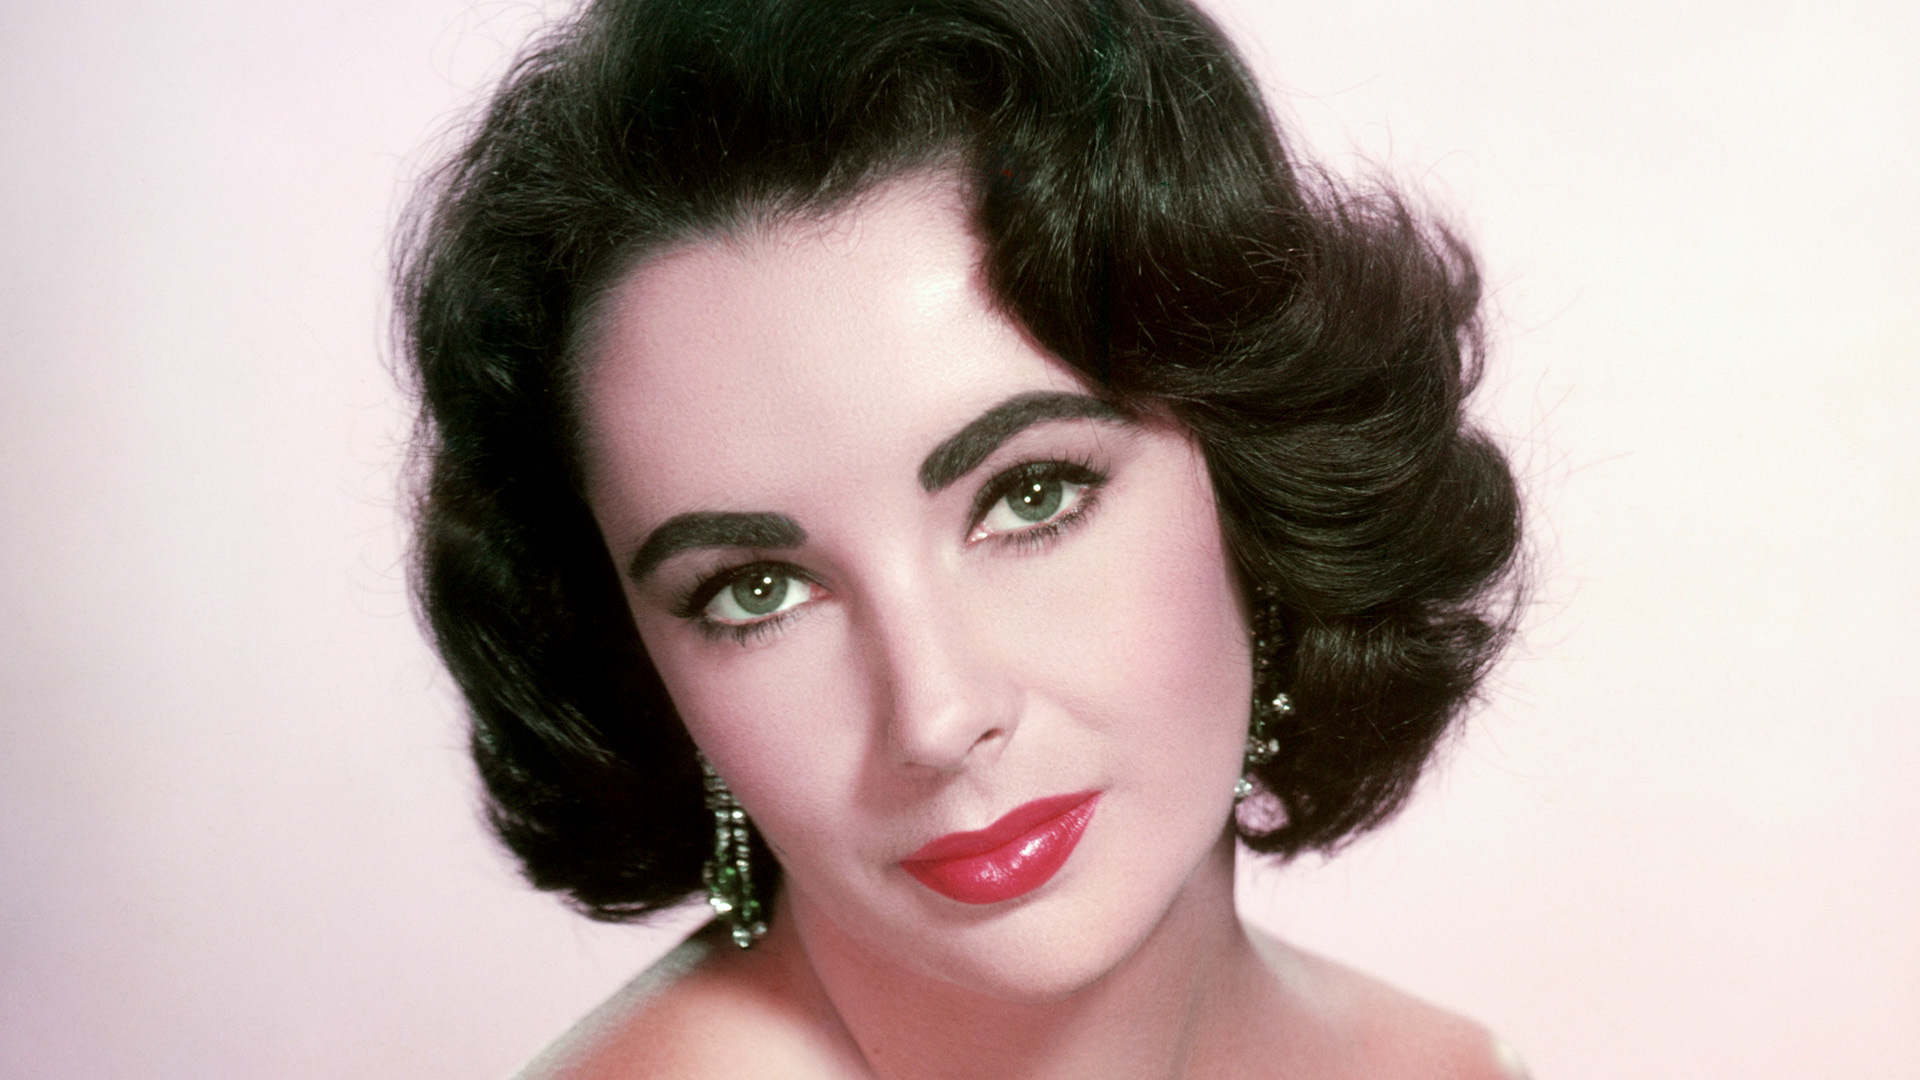 Elizabeth Taylor, Movies icon, Cruise tribute, Valuables collection, 1920x1080 Full HD Desktop